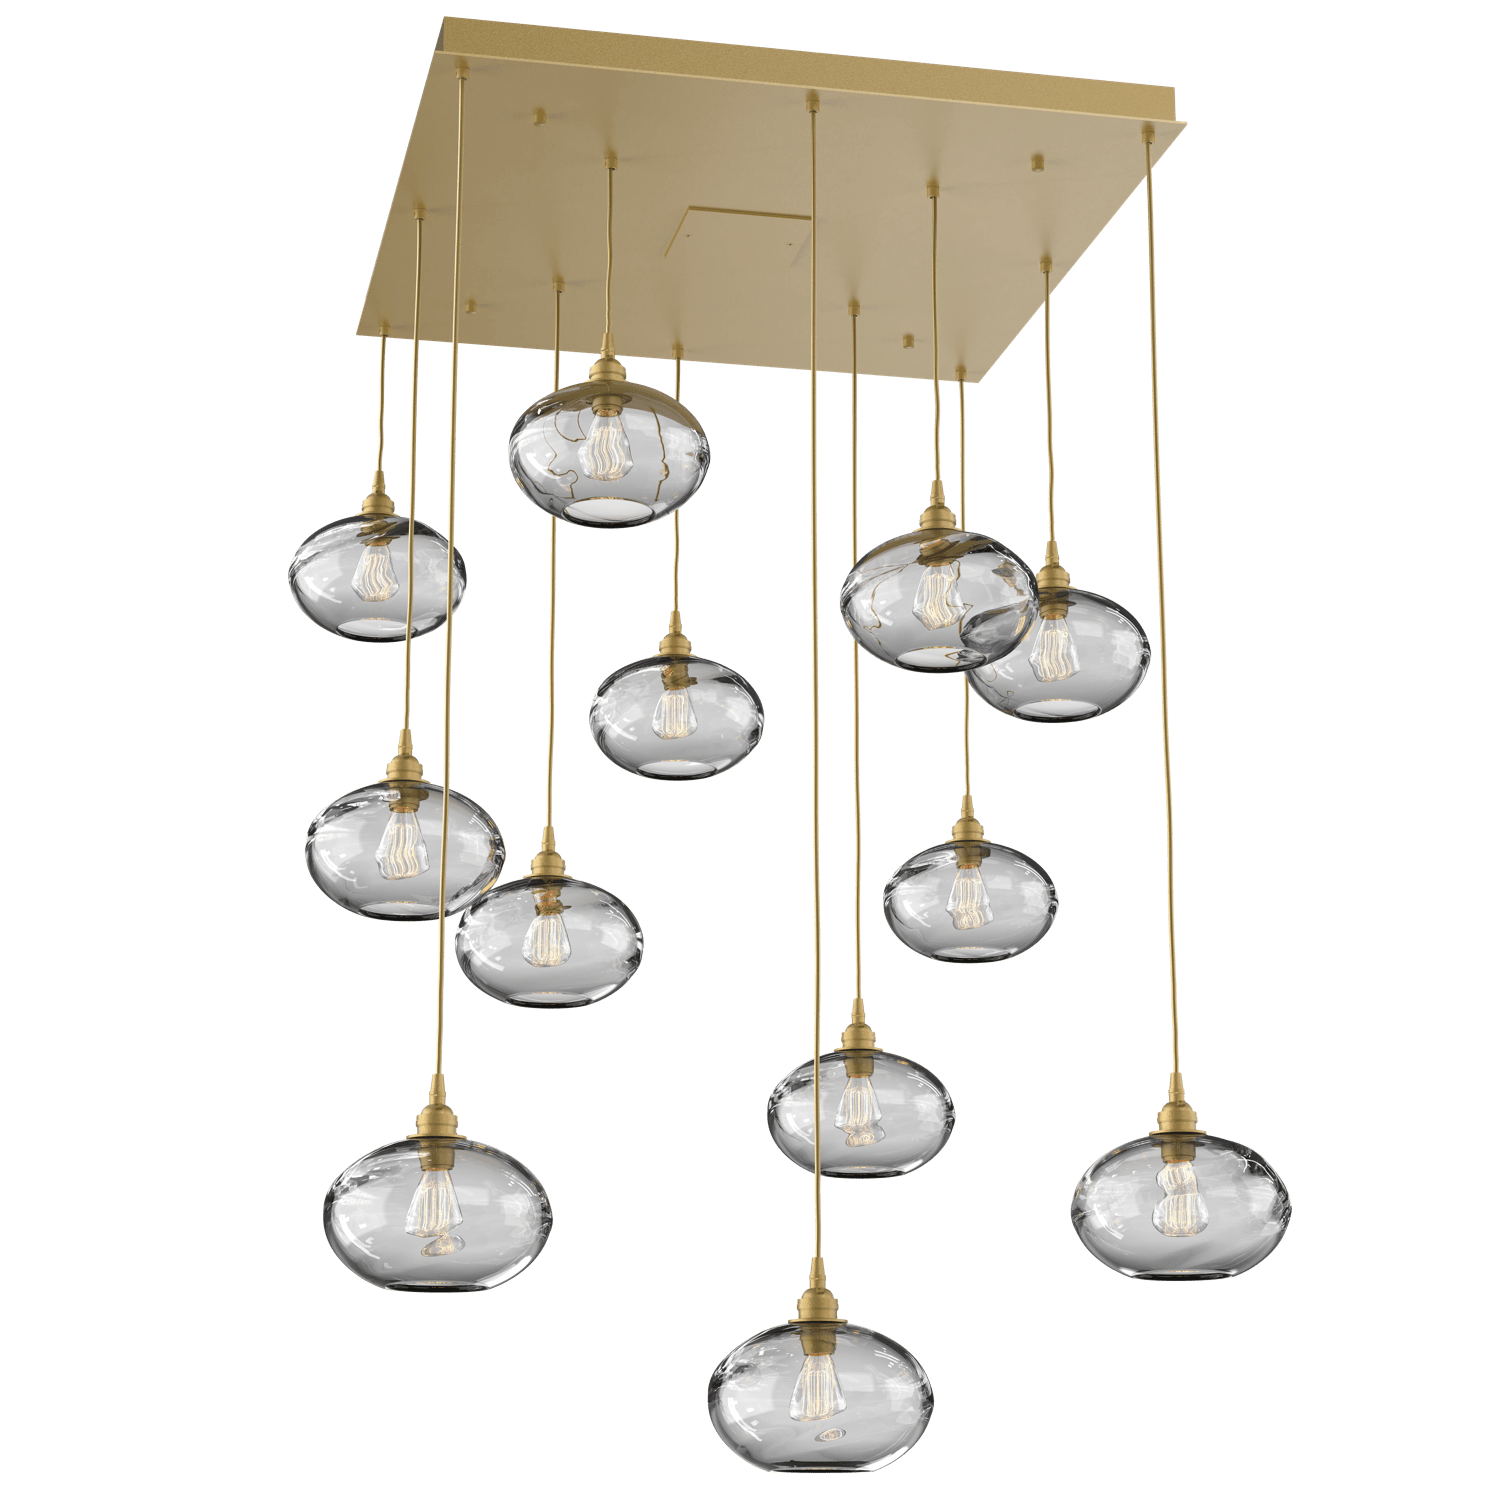 CHB0036-12-GB-OC-Hammerton-Studio-Optic-Blown-Glass-Coppa-12-light-square-pendant-chandelier-with-gilded-brass-finish-and-optic-clear-blown-glass-shades-and-incandescent-lamping